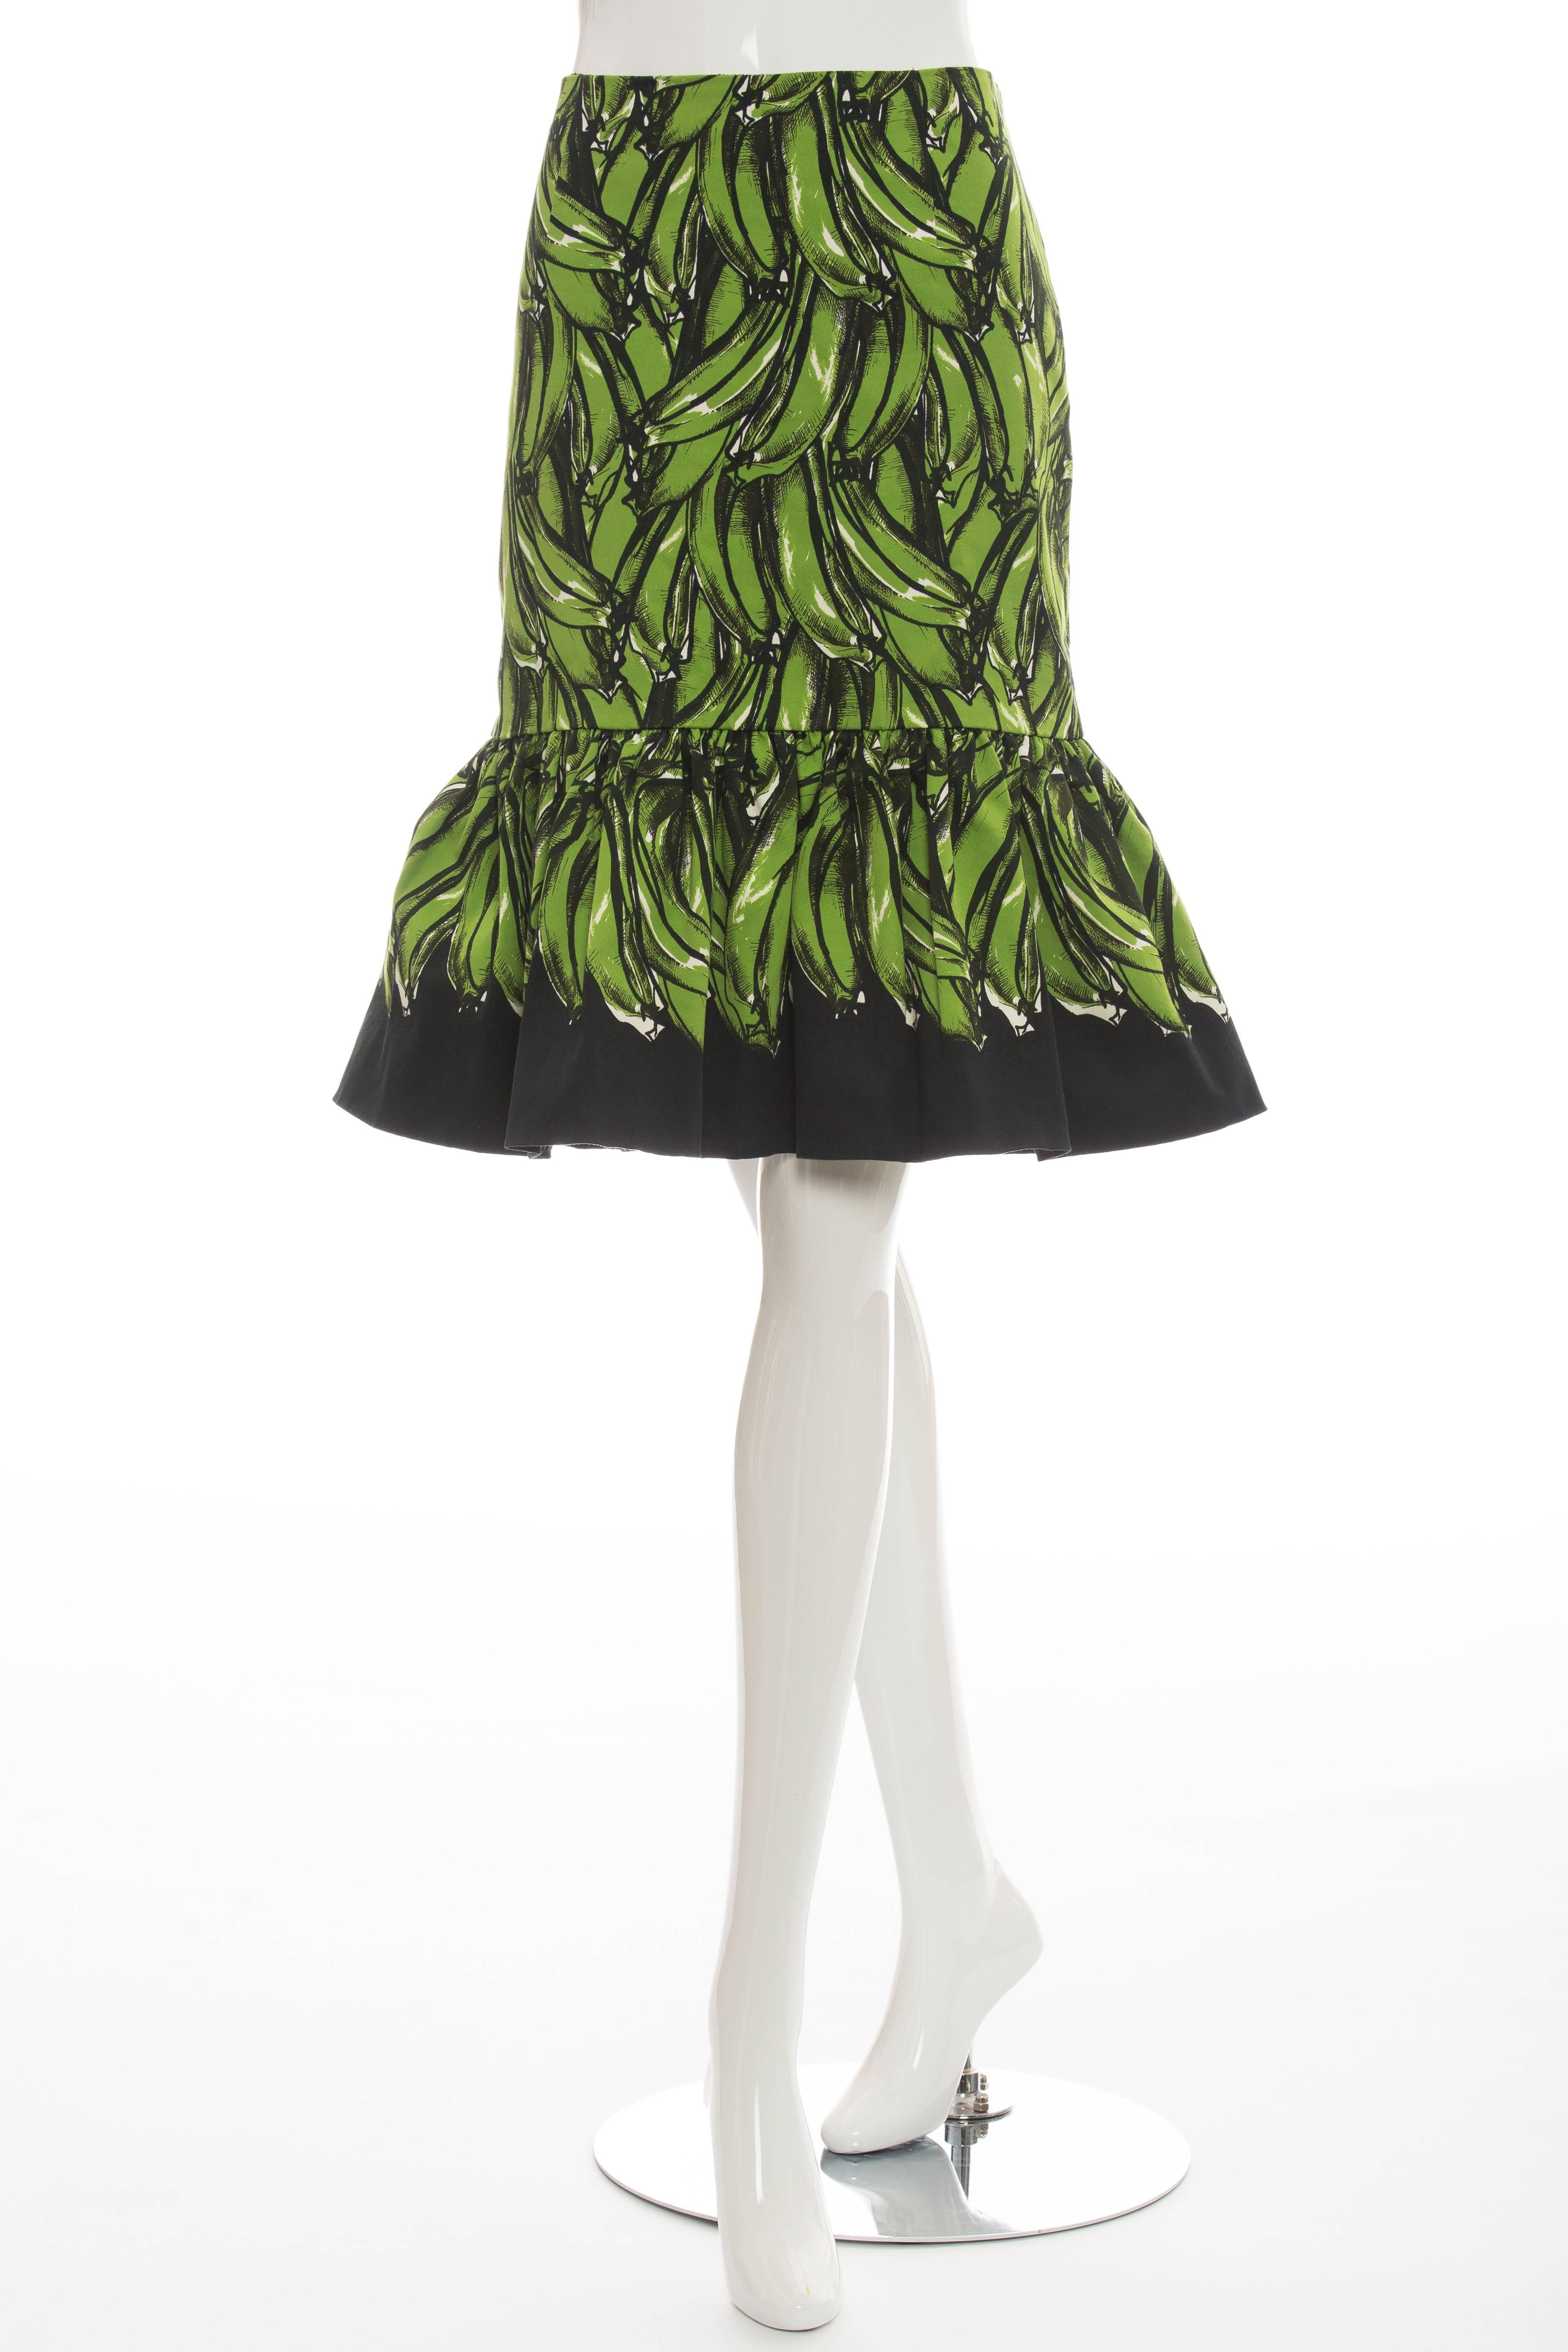 Prada, Spring/Summer 2011 banana print skirt with flared hem and invisible zip closure at side seam.

Waist 29”, Hip 35”, Length 24.5”
Fabric Content: 98% Cotton, 2% Other Fibers; Lining: 74% Cupro, 26% Silk